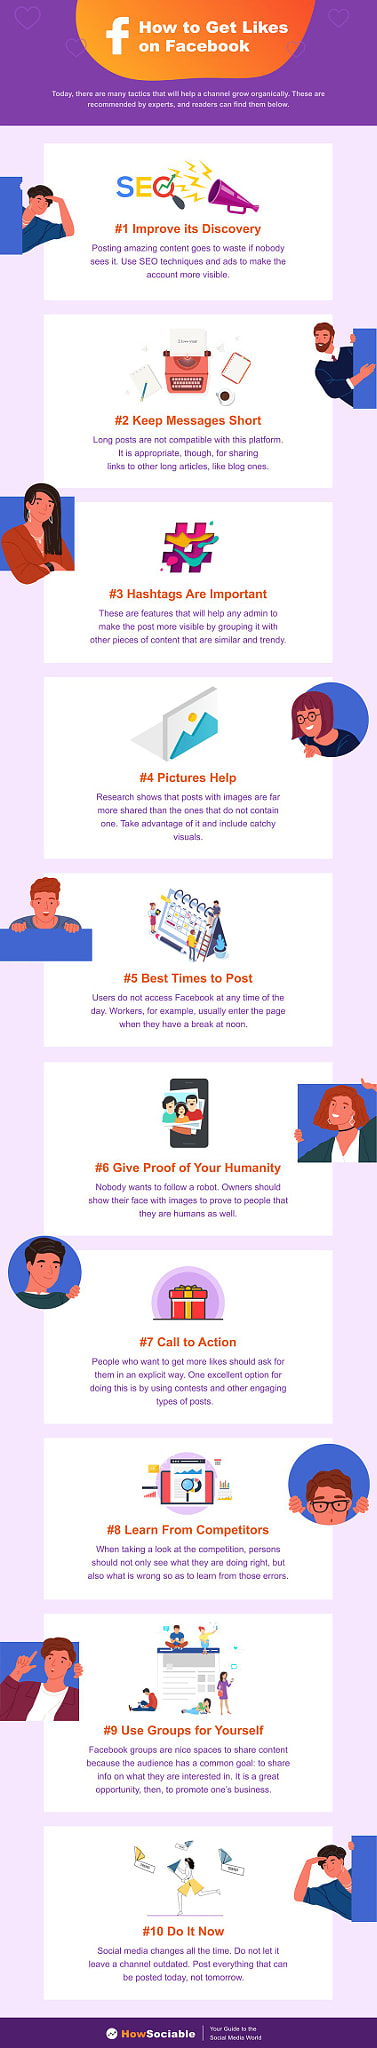 How to Get Likes on Facebook Infographic